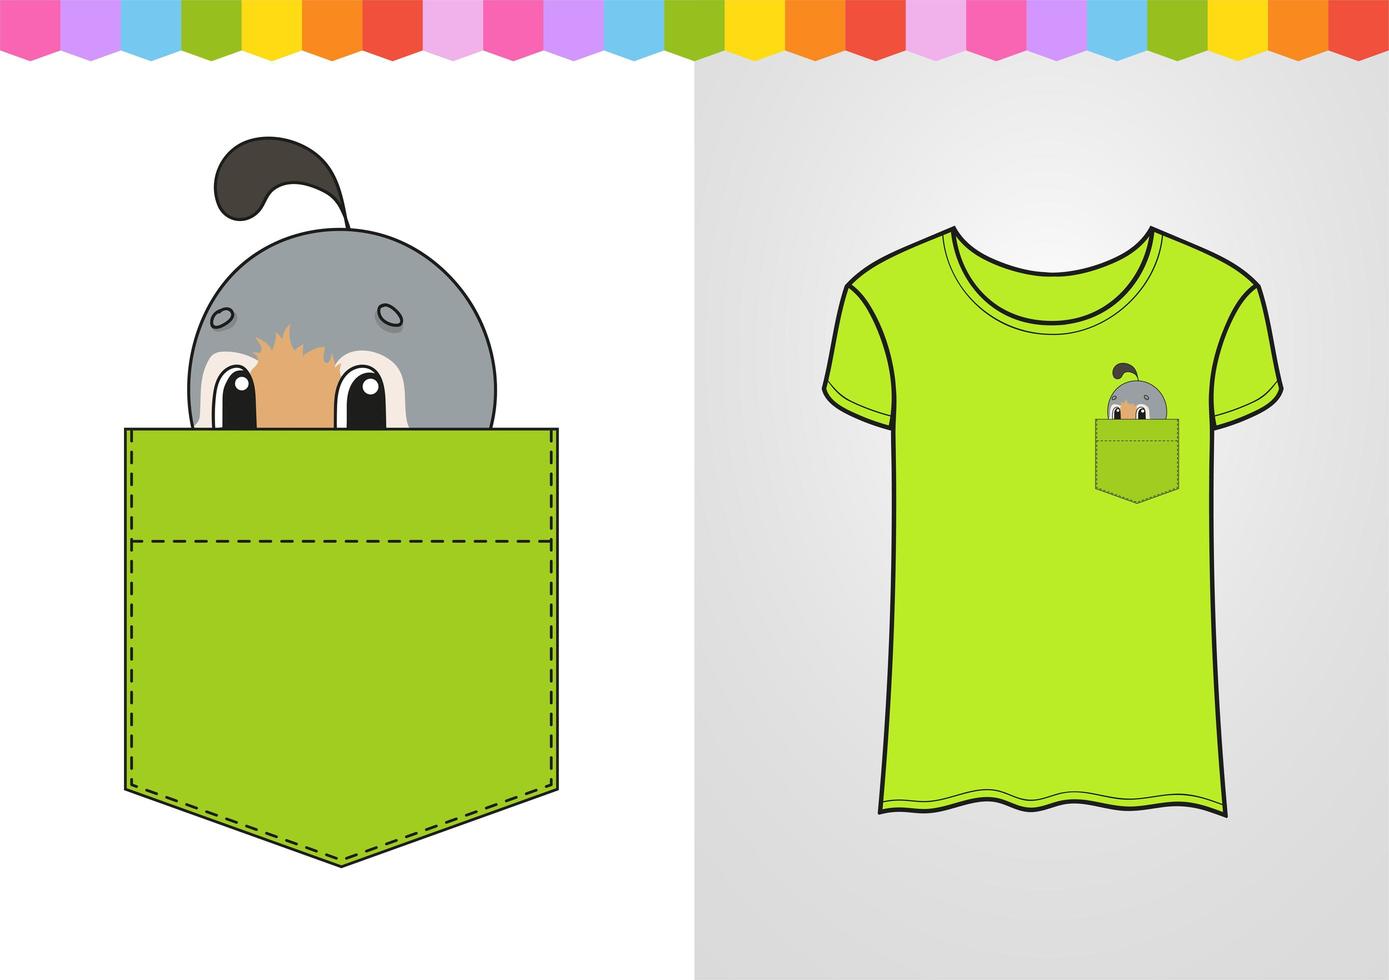 Cute character in shirt pocket. Quail bird. Colorful vector illustration. Cartoon style. Isolated on white background. Design element.